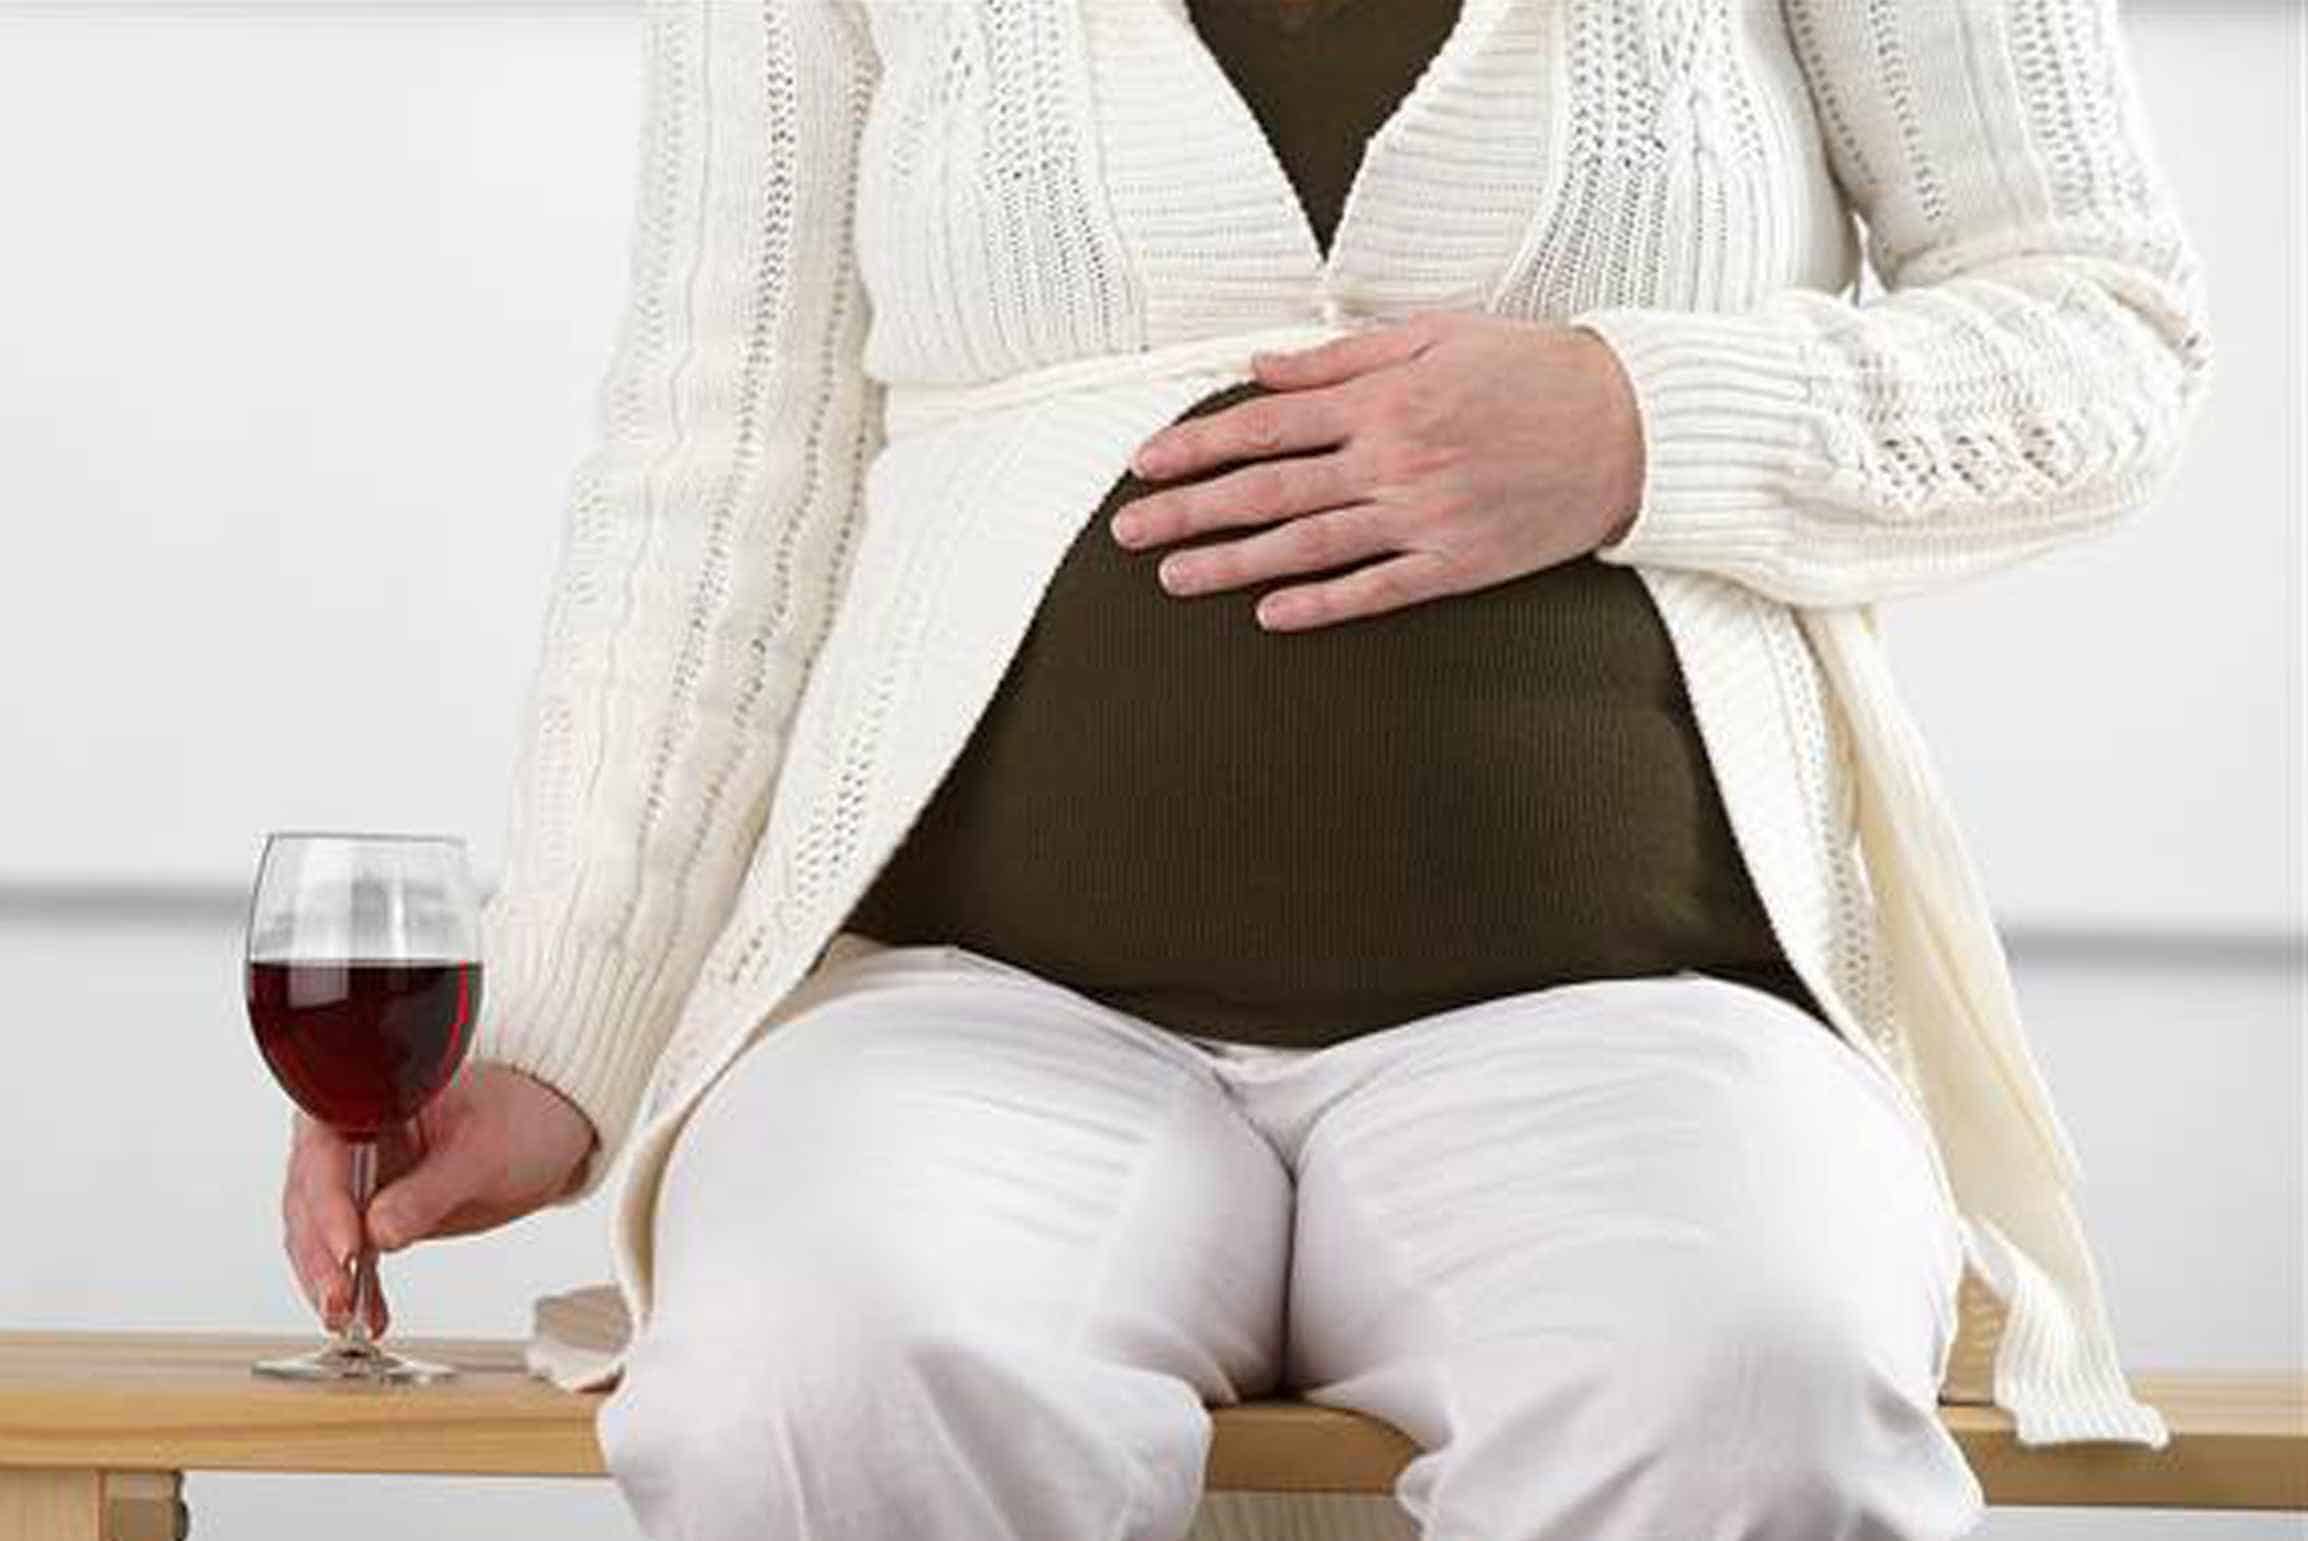 3 Possible Dangers When a Pregnant Woman Drink Wine